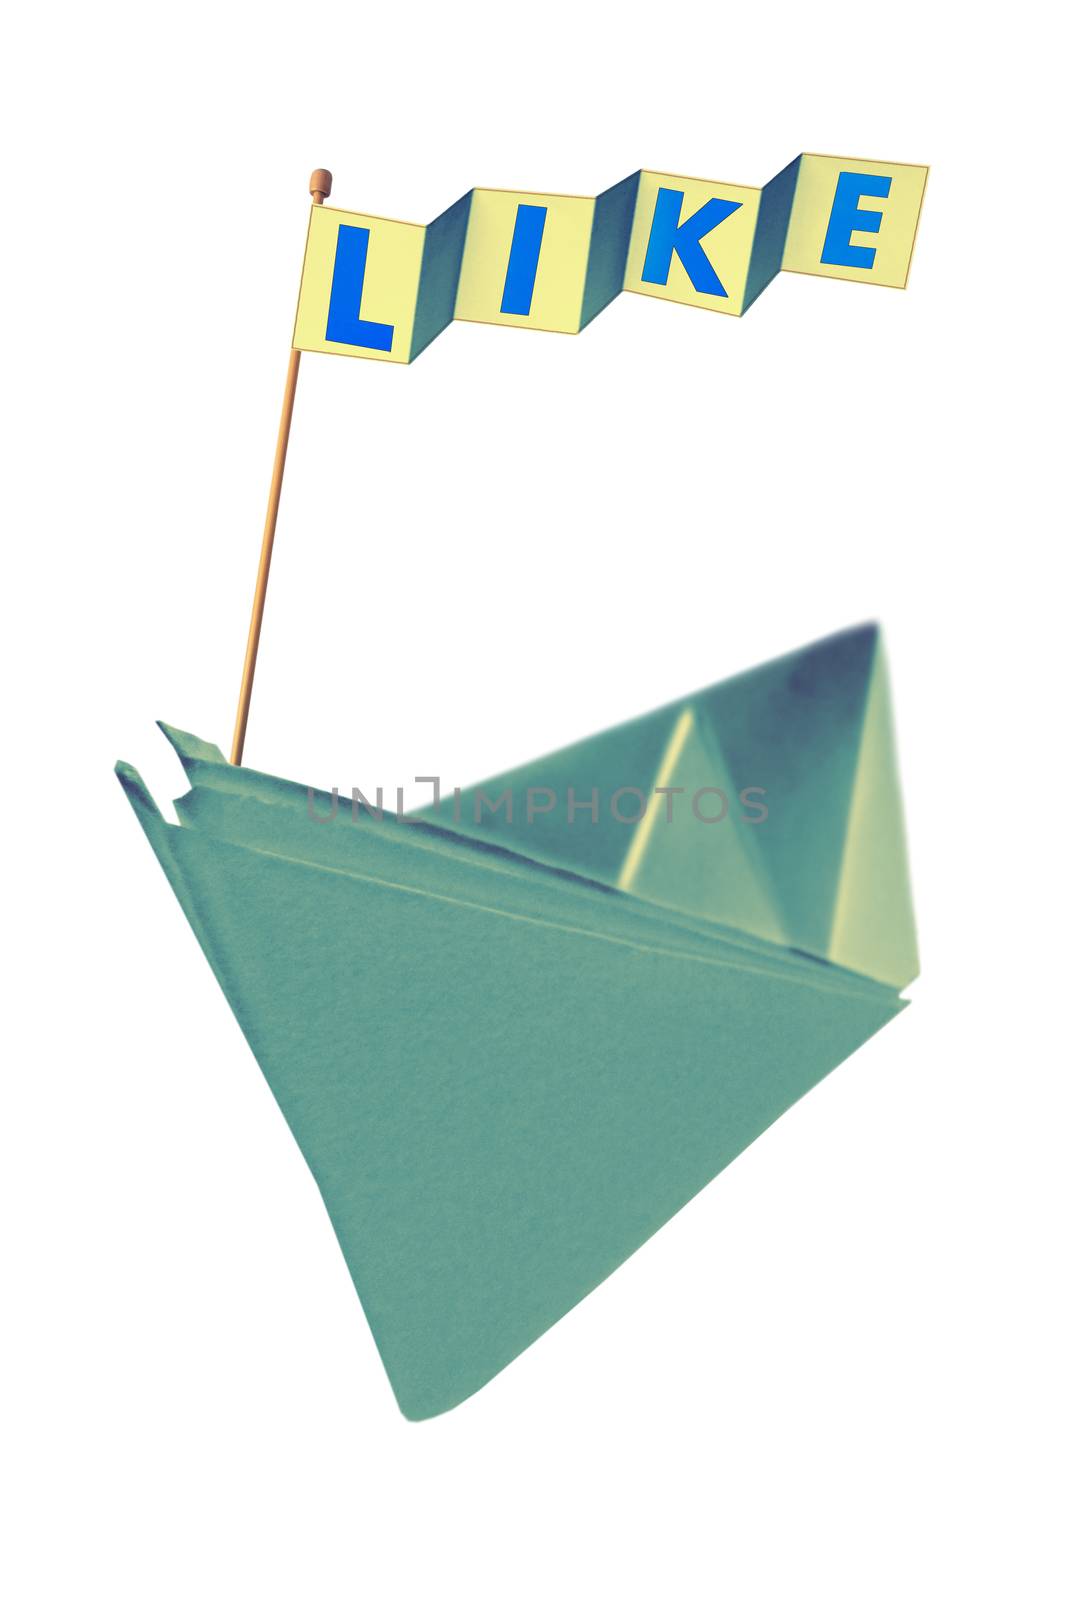 Origami paper boat with flag writing LIKE